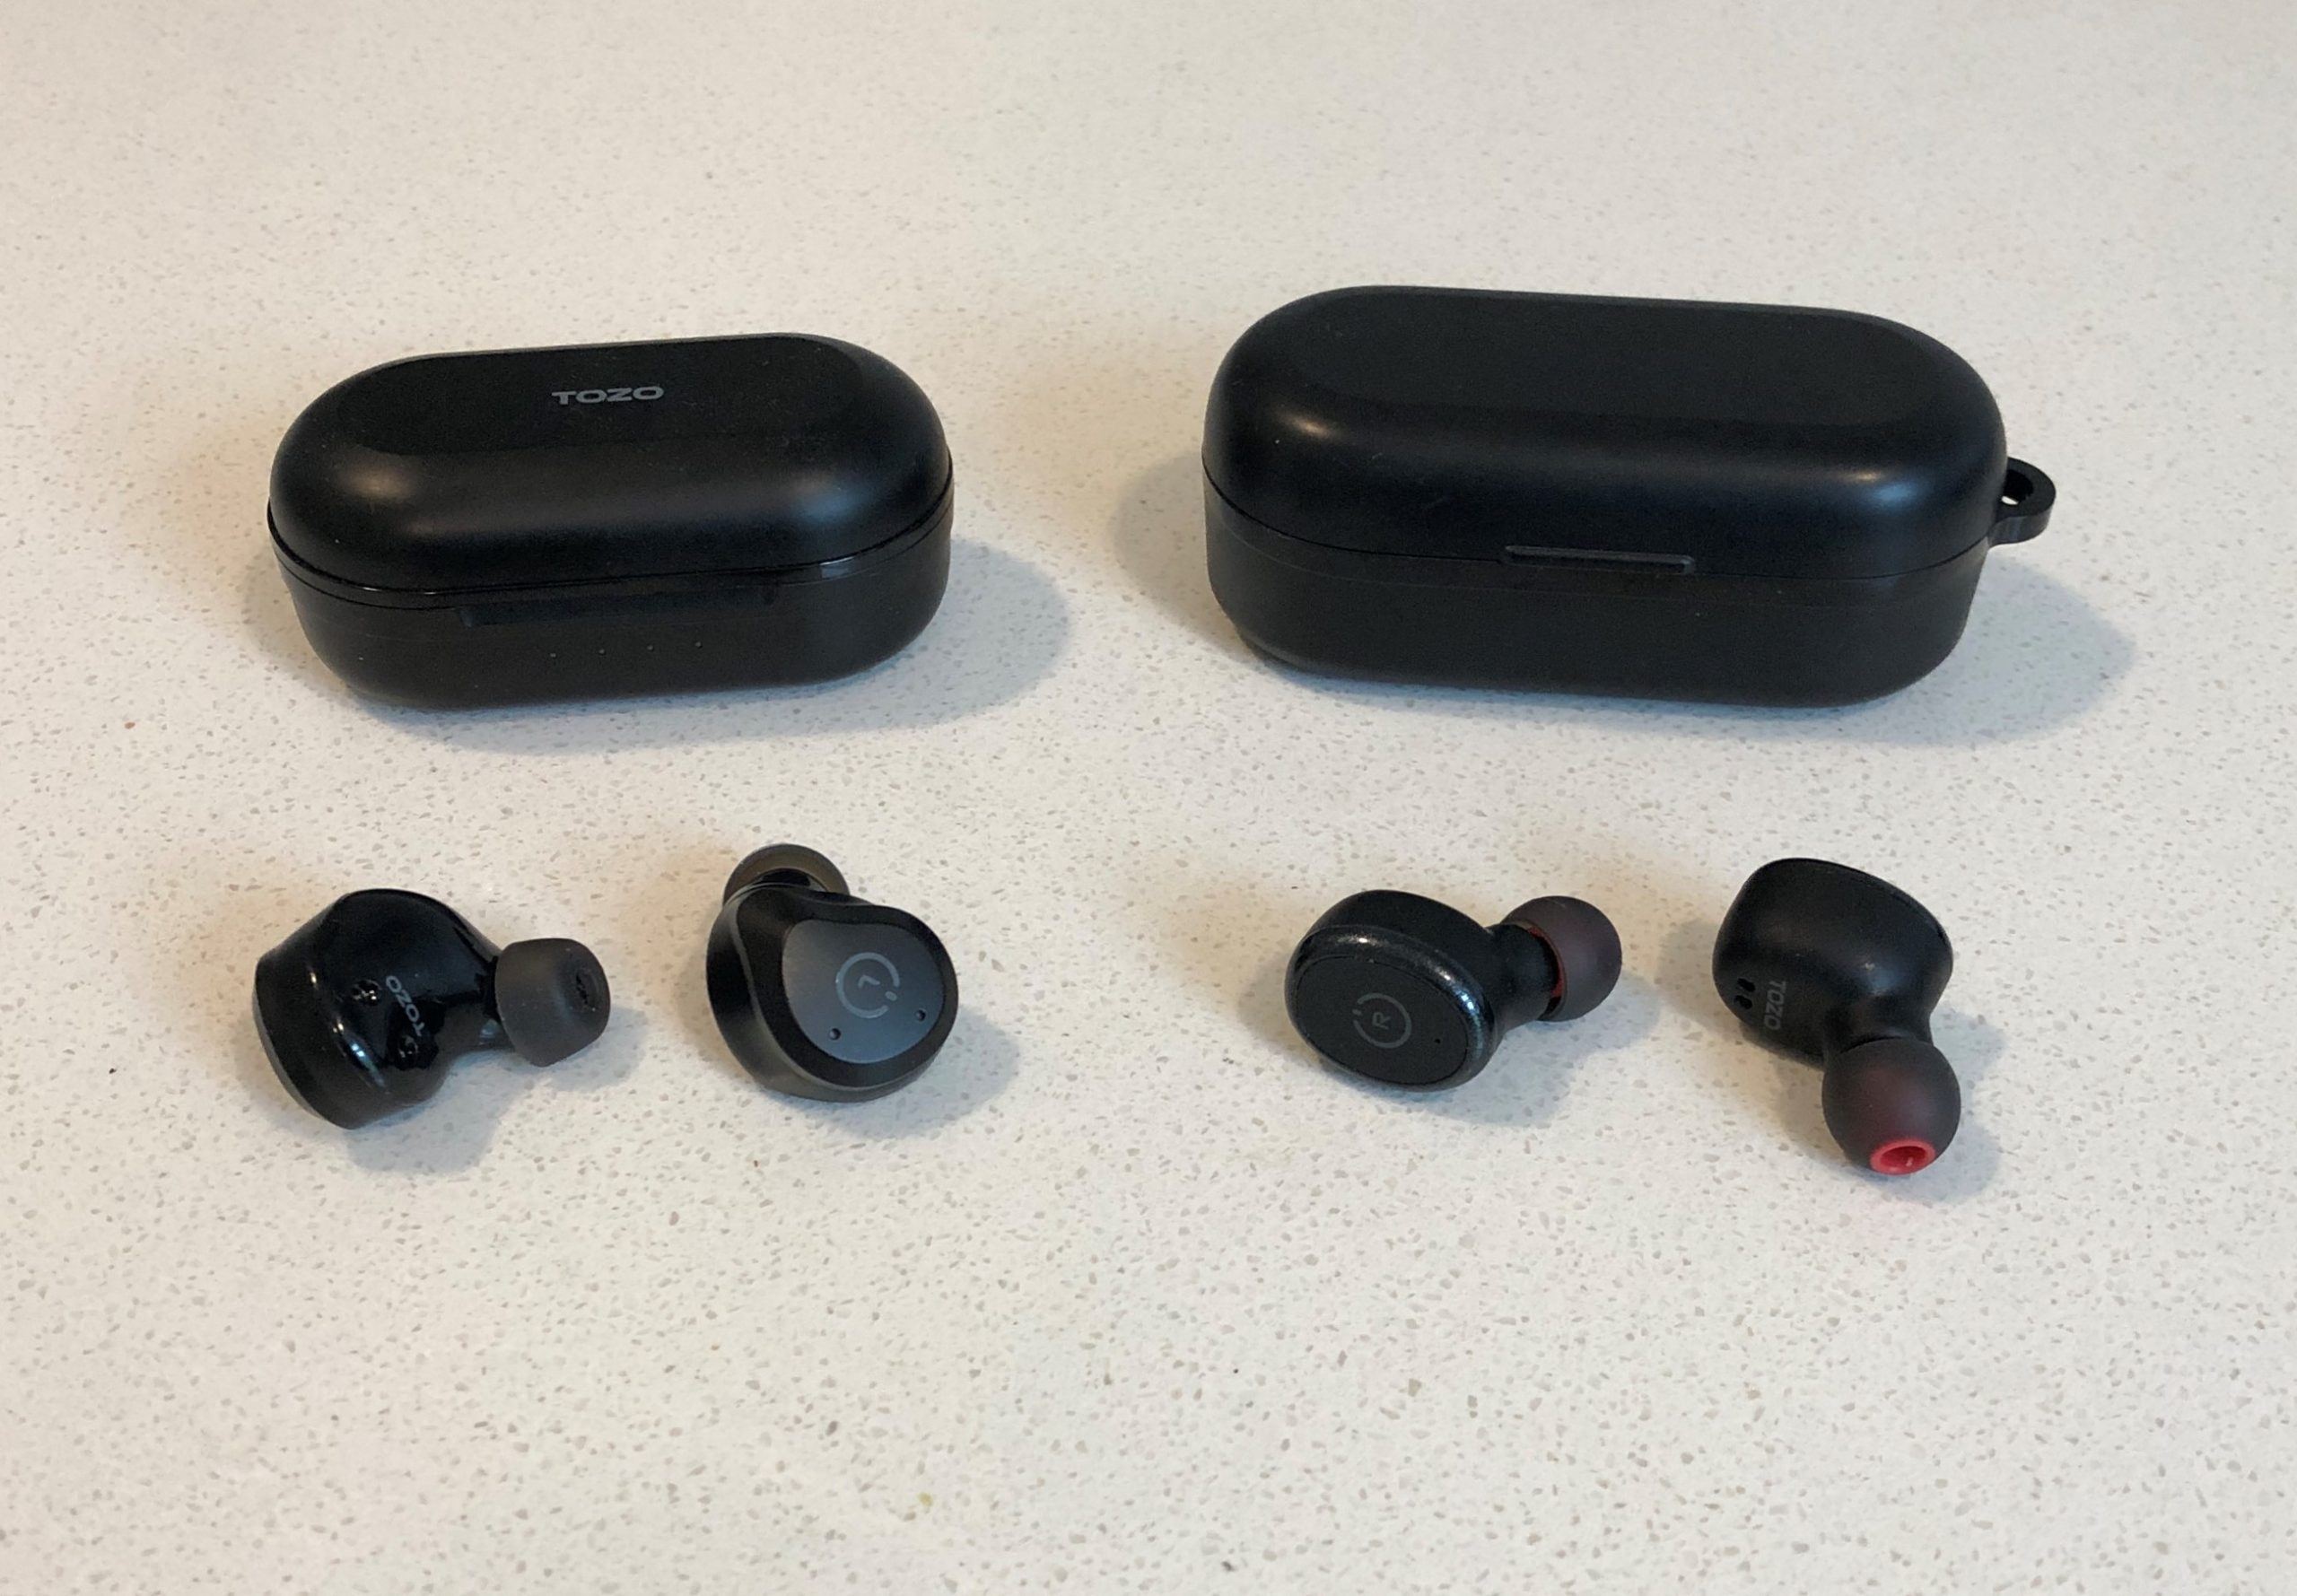 TOZO NC9 vs T10 charging and carrying cases and wireless earbuds